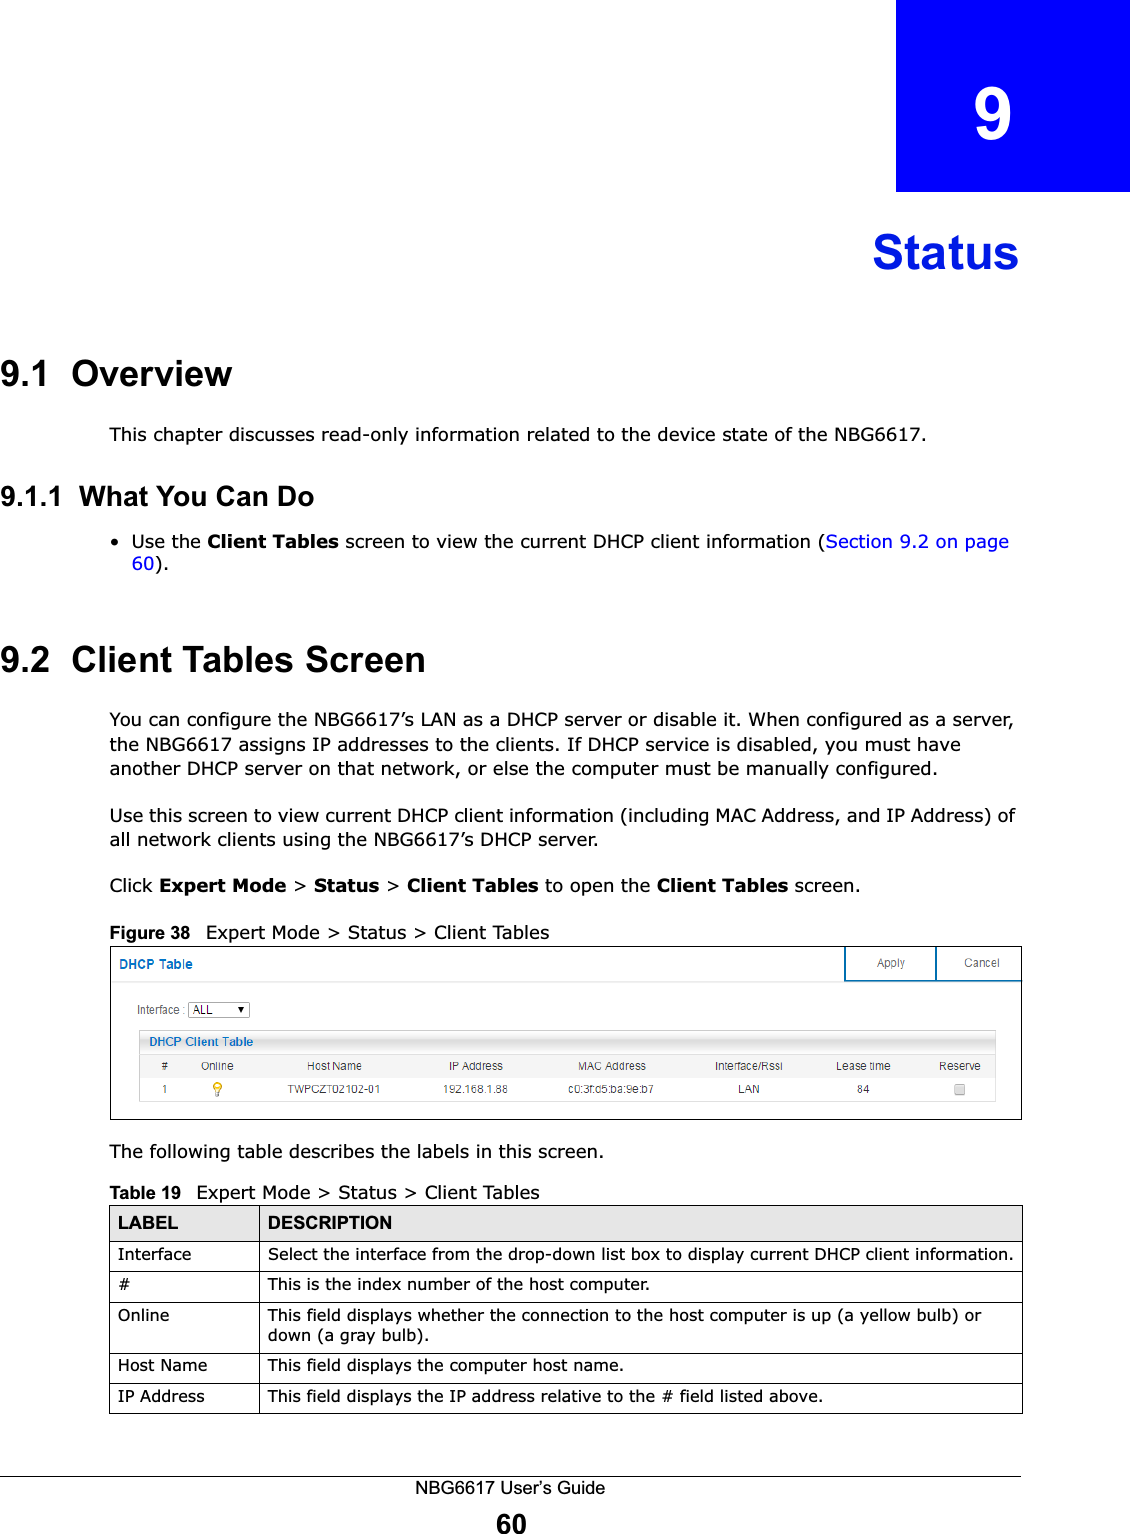 NBG6617 User’s Guide60CHAPTER   9Status9.1  OverviewThis chapter discusses read-only information related to the device state of the NBG6617.9.1.1  What You Can Do•Use the Client Tables screen to view the current DHCP client information (Section 9.2 on page 60). 9.2  Client Tables ScreenYou can configure the NBG6617’s LAN as a DHCP server or disable it. When configured as a server, the NBG6617 assigns IP addresses to the clients. If DHCP service is disabled, you must have another DHCP server on that network, or else the computer must be manually configured.Use this screen to view current DHCP client information (including MAC Address, and IP Address) of all network clients using the NBG6617’s DHCP server. Click Expert Mode &gt; Status &gt; Client Tables to open the Client Tables screen.Figure 38   Expert Mode &gt; Status &gt; Client TablesThe following table describes the labels in this screen.Table 19   Expert Mode &gt; Status &gt; Client TablesLABEL  DESCRIPTIONInterface Select the interface from the drop-down list box to display current DHCP client information.#  This is the index number of the host computer.Online This field displays whether the connection to the host computer is up (a yellow bulb) or down (a gray bulb).Host Name This field displays the computer host name.IP Address This field displays the IP address relative to the # field listed above.